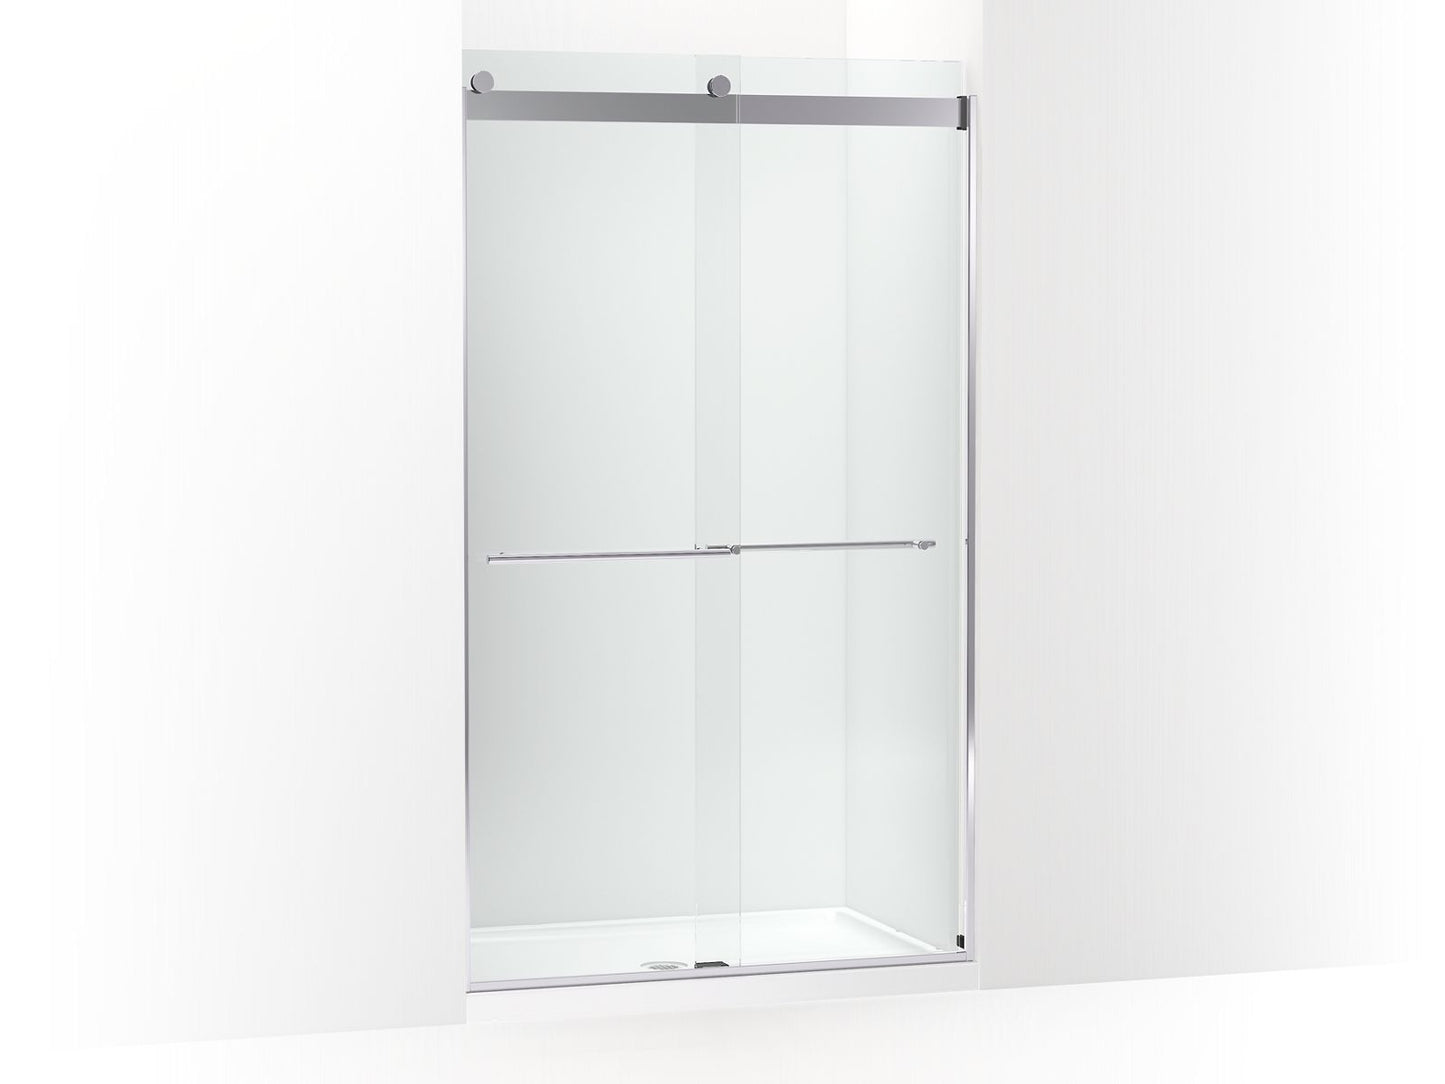 KOHLER K-702428-L-SHP Levity Plus Frameless Sliding Shower Door, 81-5/8" H X 44-5/8 - 47-5/8" W, With 3/8"-Thick Crystal Clear Glass In Bright Polished Silver